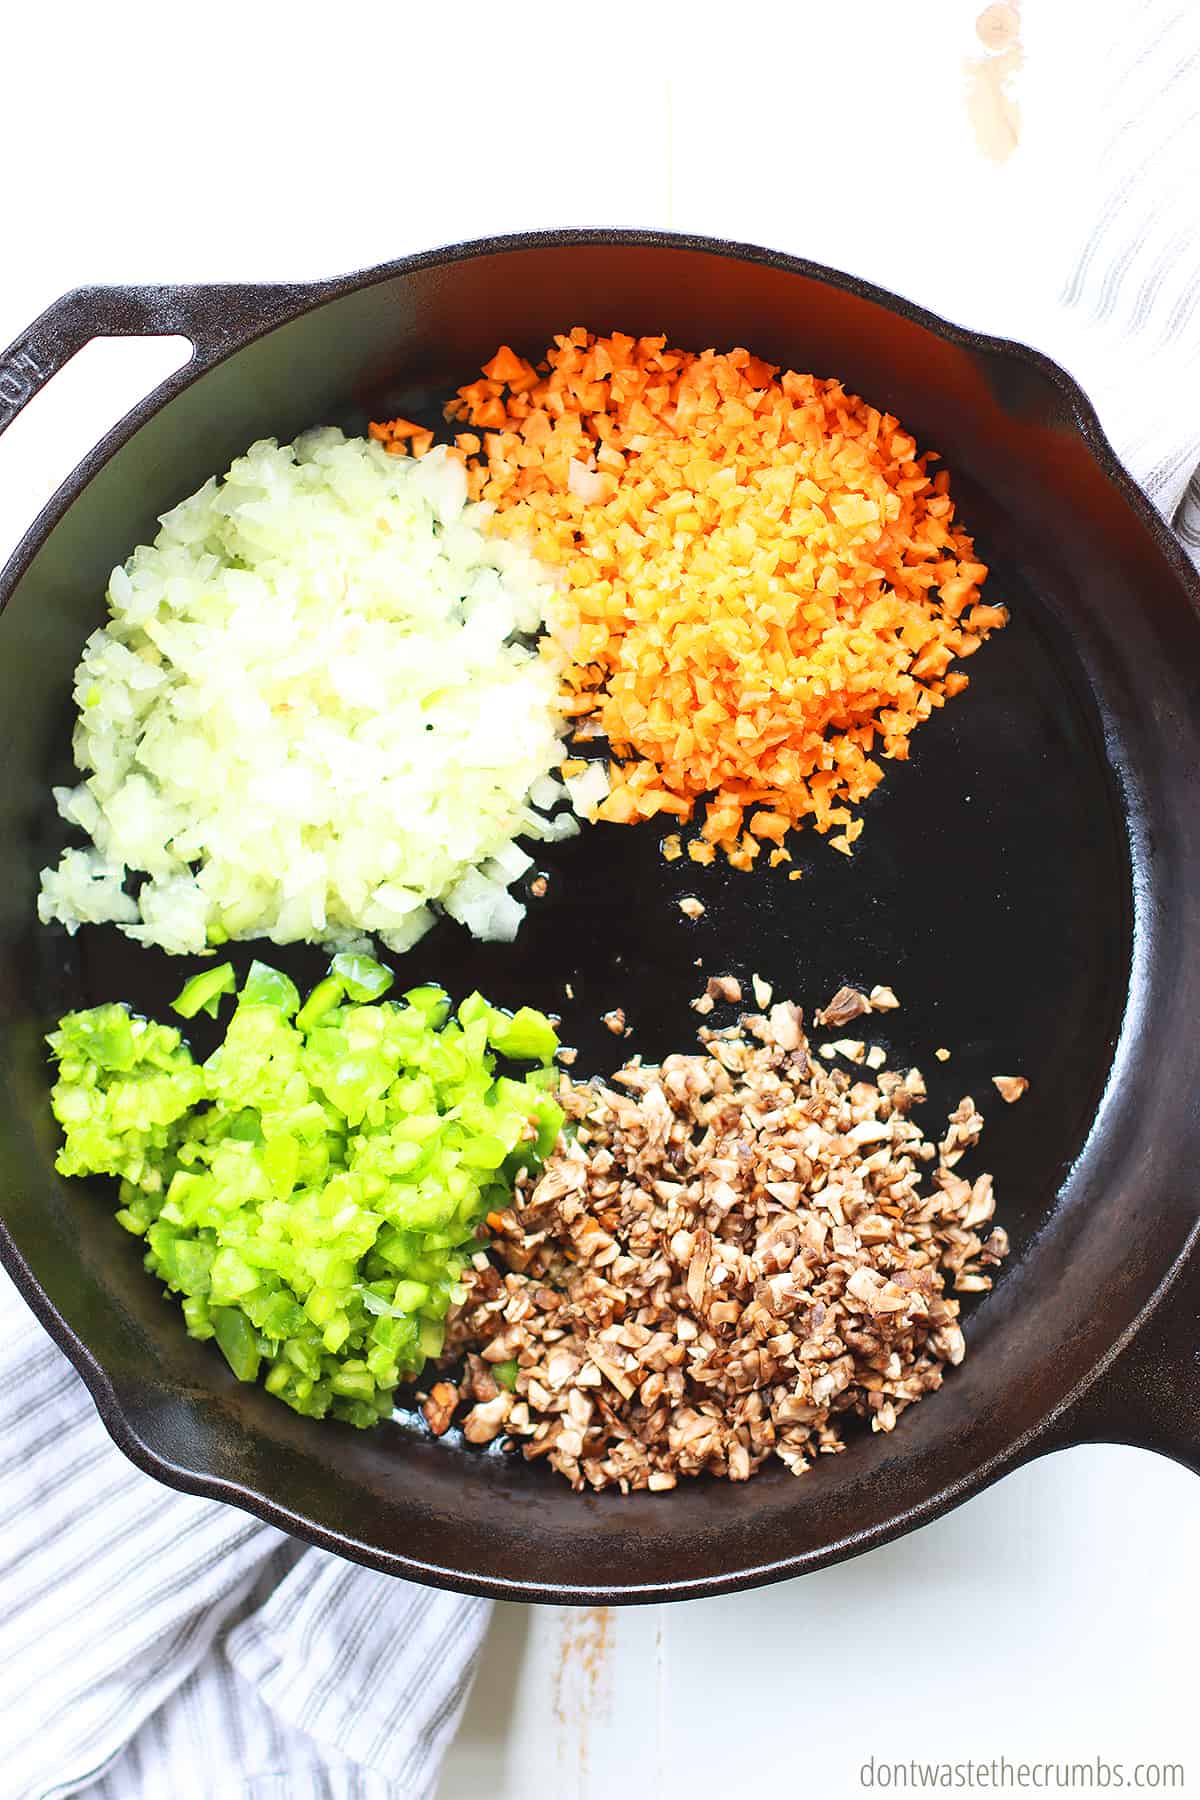 Chopped onion, carrot, mushrooms, and celery in their own sections in a cast iron skillet.